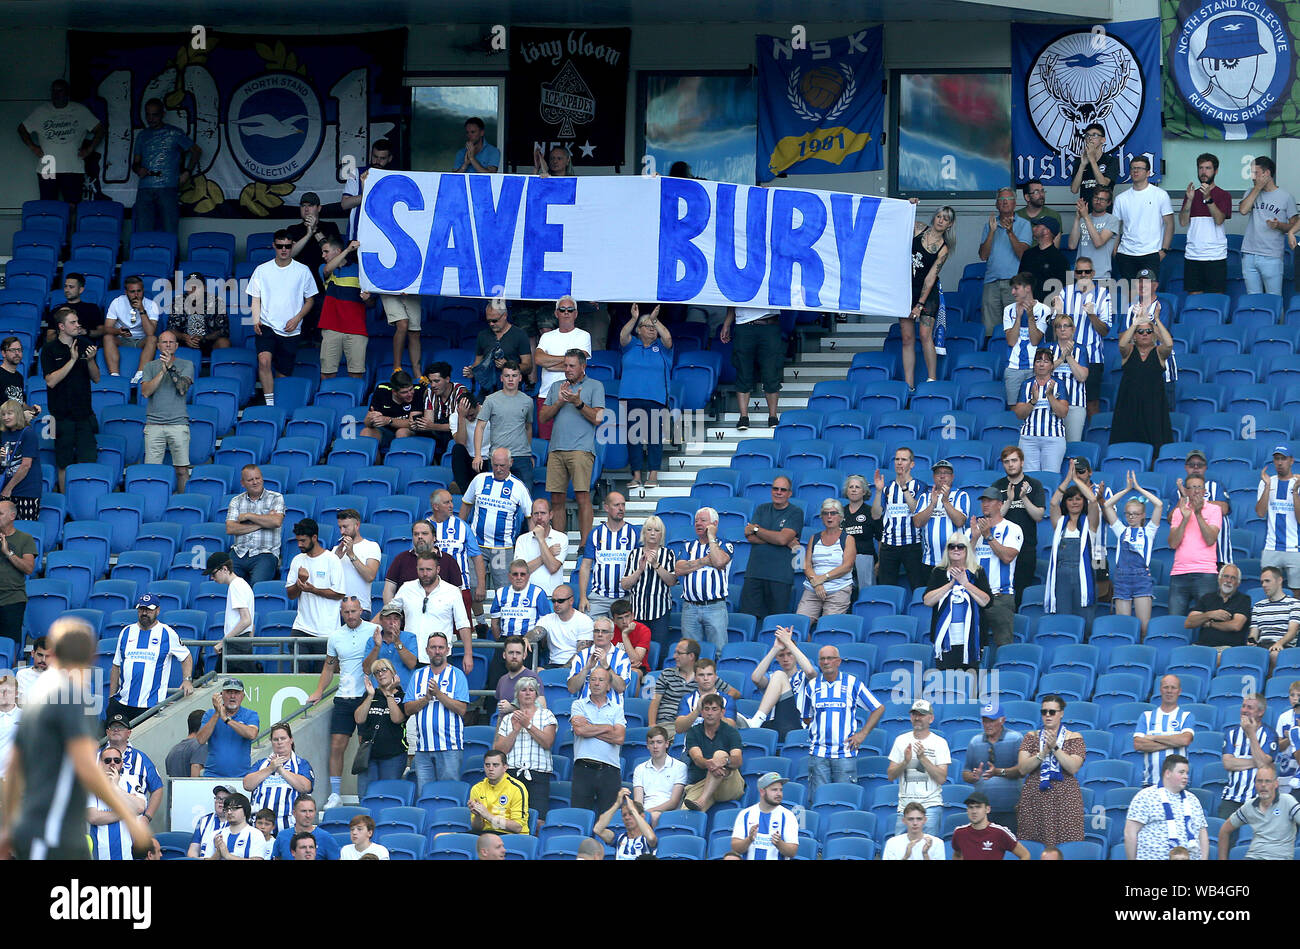 A 'Save Bury' banner in the stands during the Premier League match at the AMEX Stadium, Brighton. Stock Photo